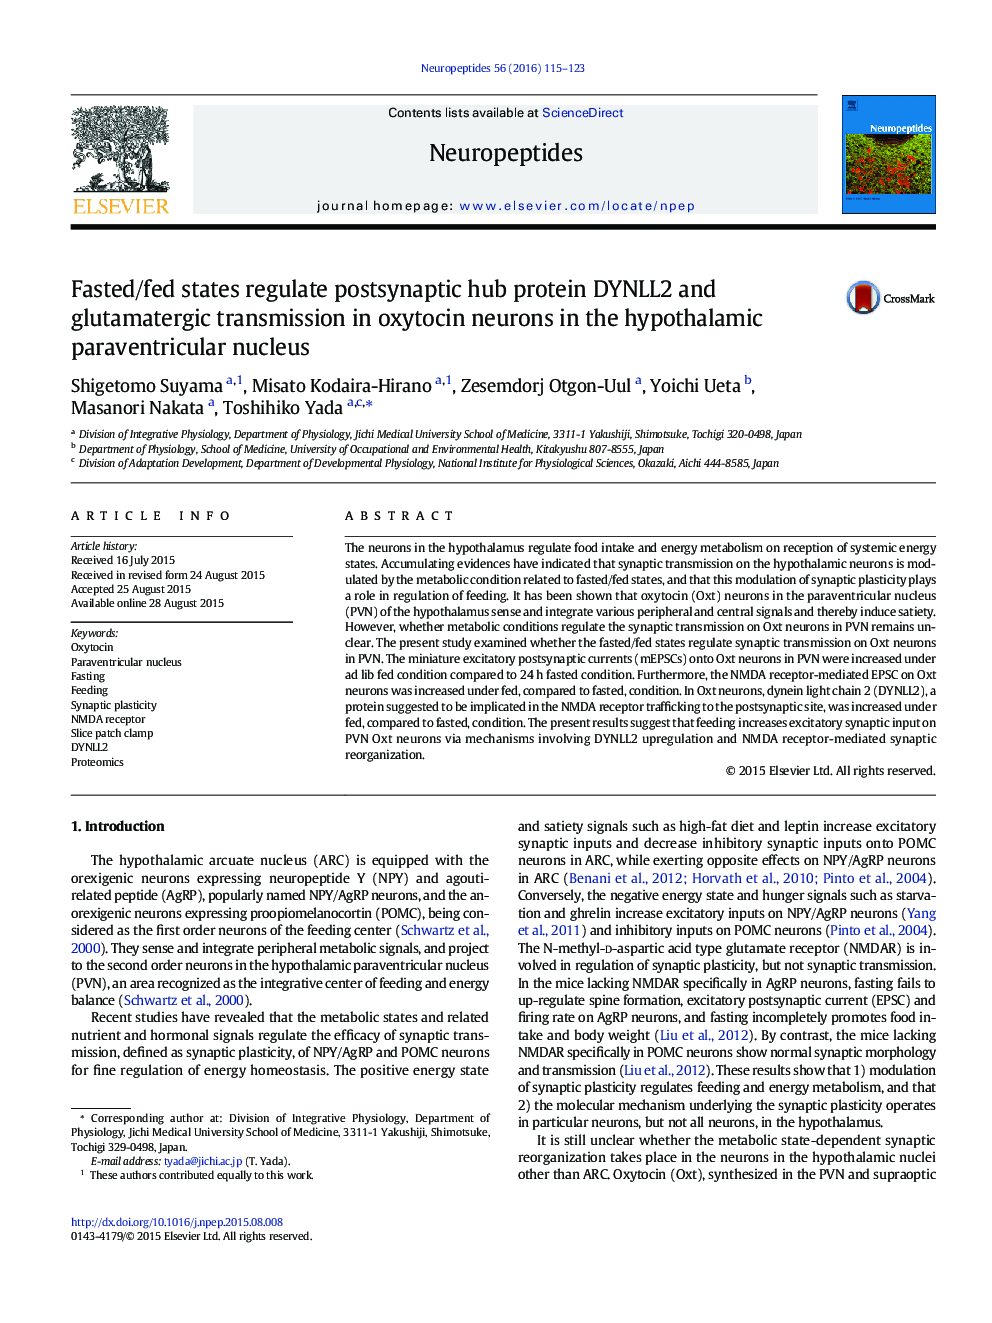 Fasted/fed states regulate postsynaptic hub protein DYNLL2 and glutamatergic transmission in oxytocin neurons in the hypothalamic paraventricular nucleus